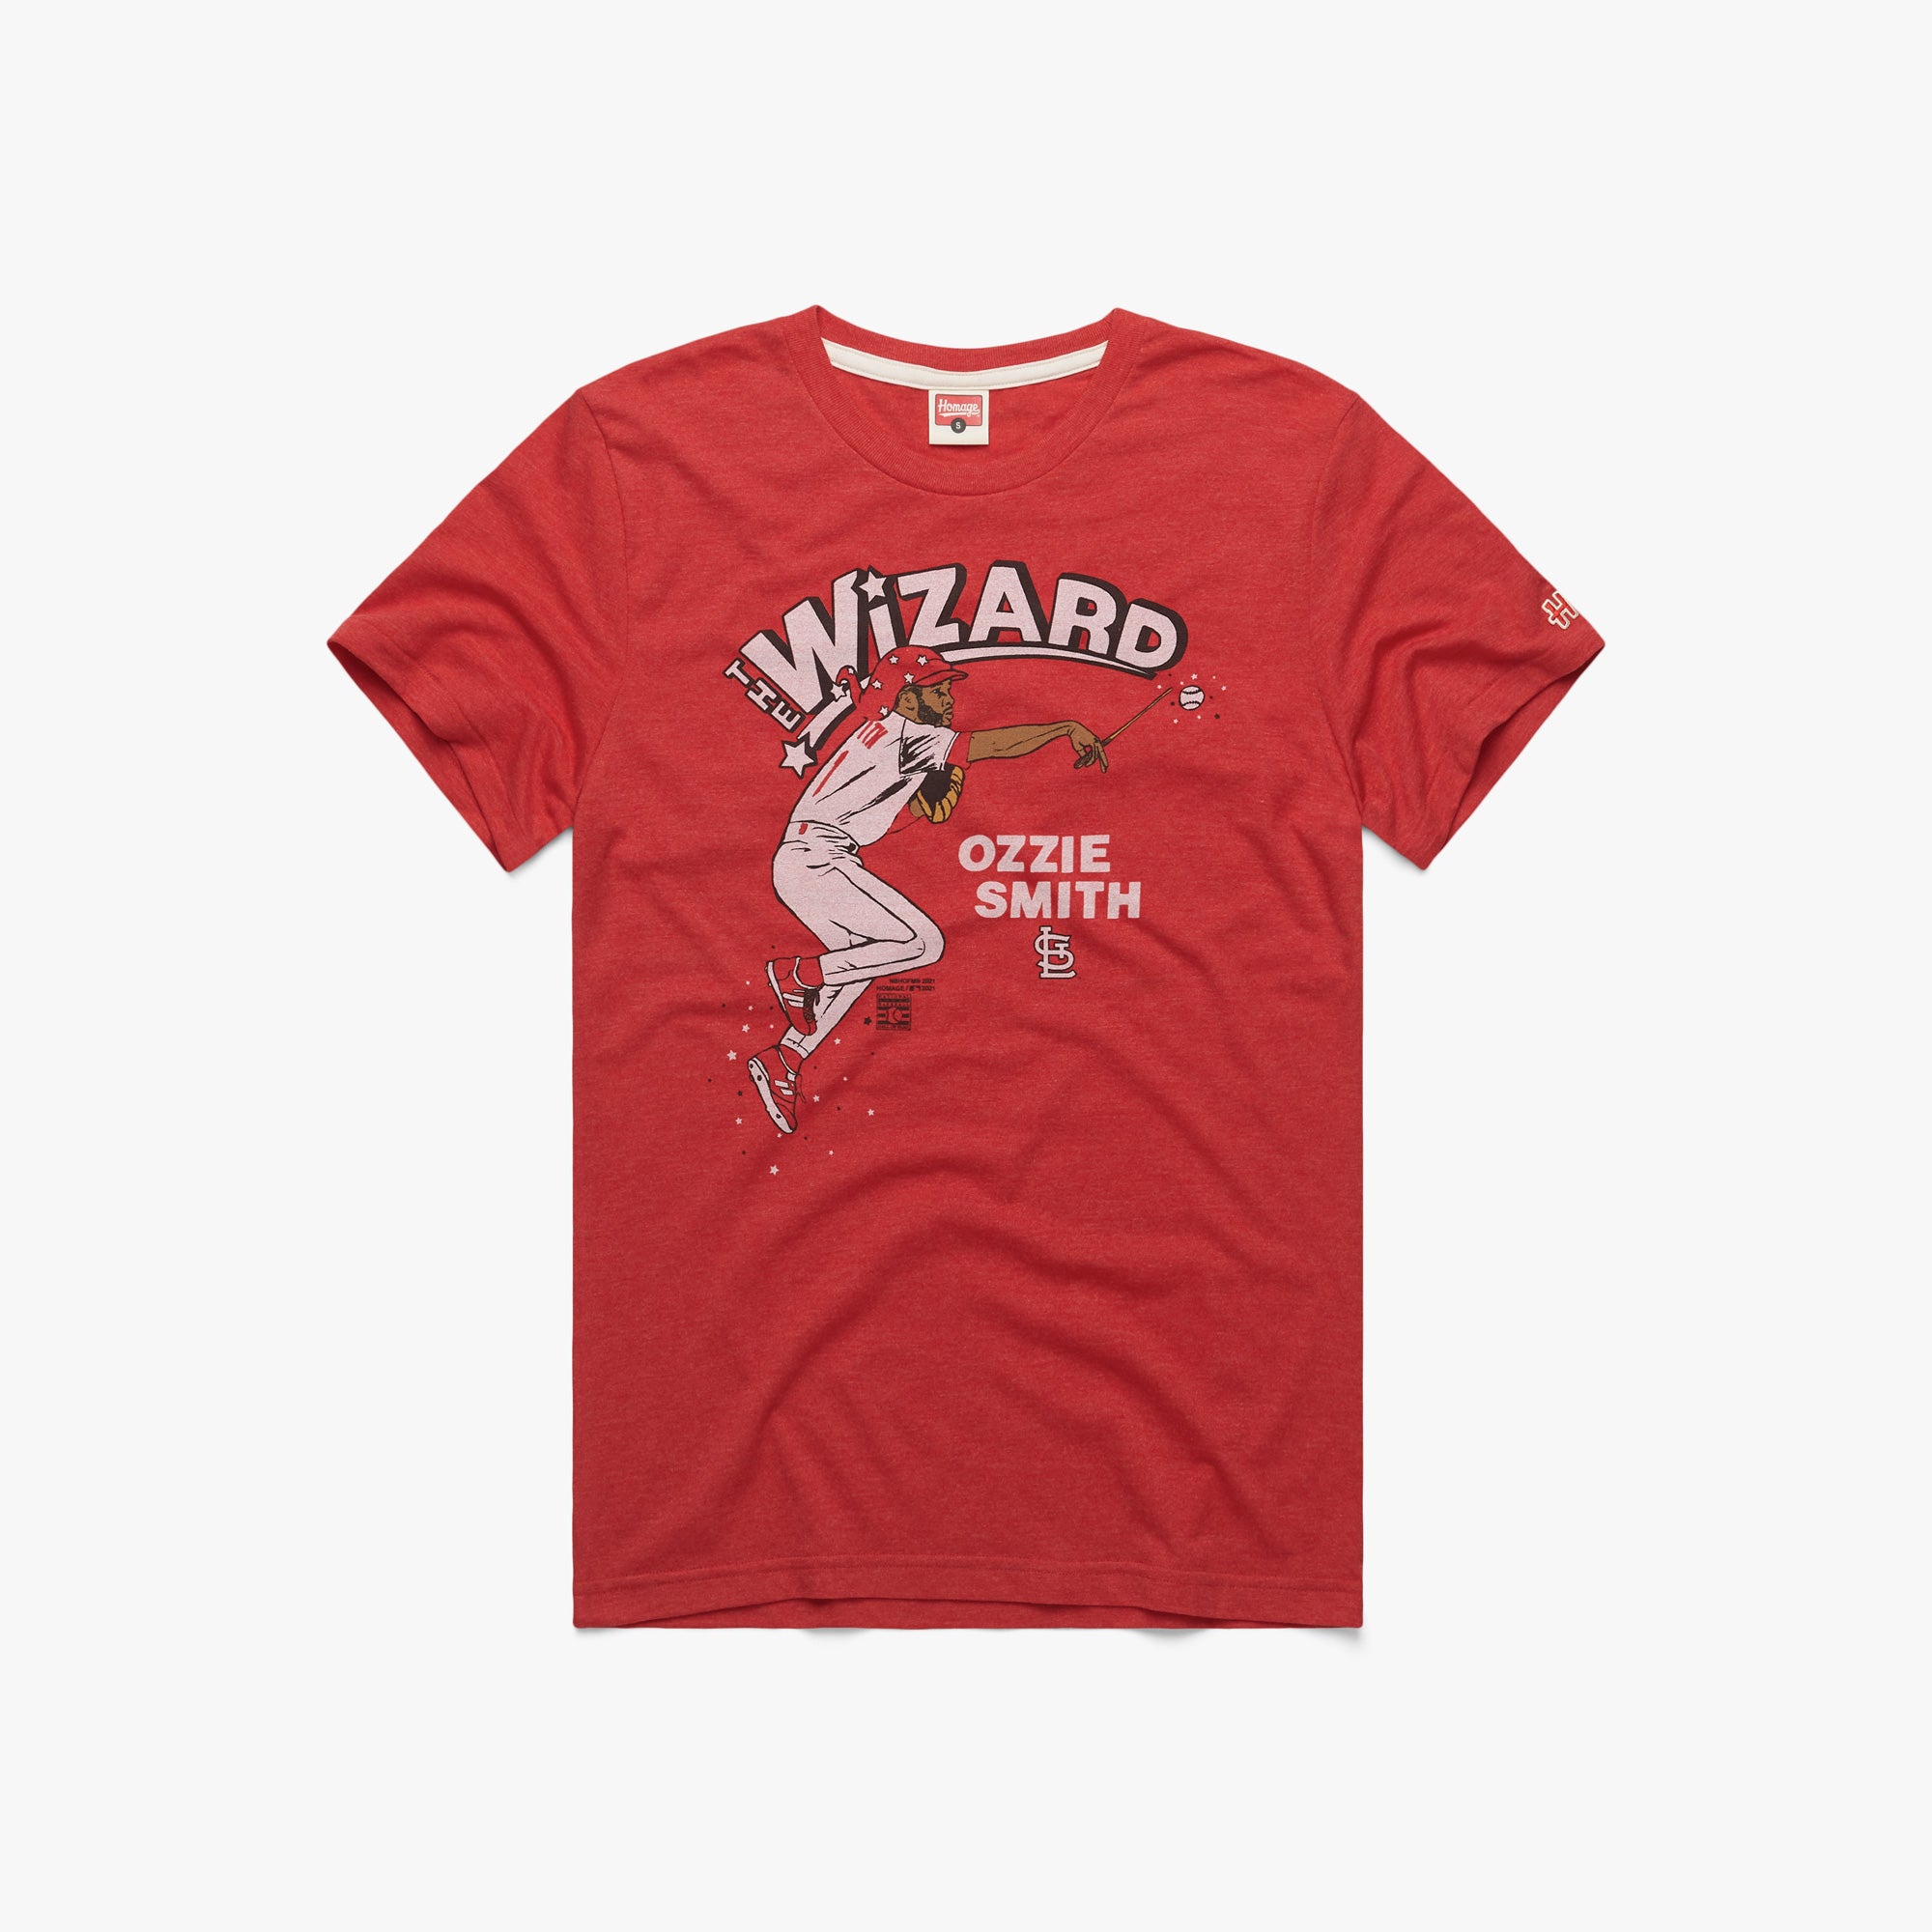 HOMAGE Ozzie Smith The Wizard St. Louis Cardinals Baseball T-Shirt